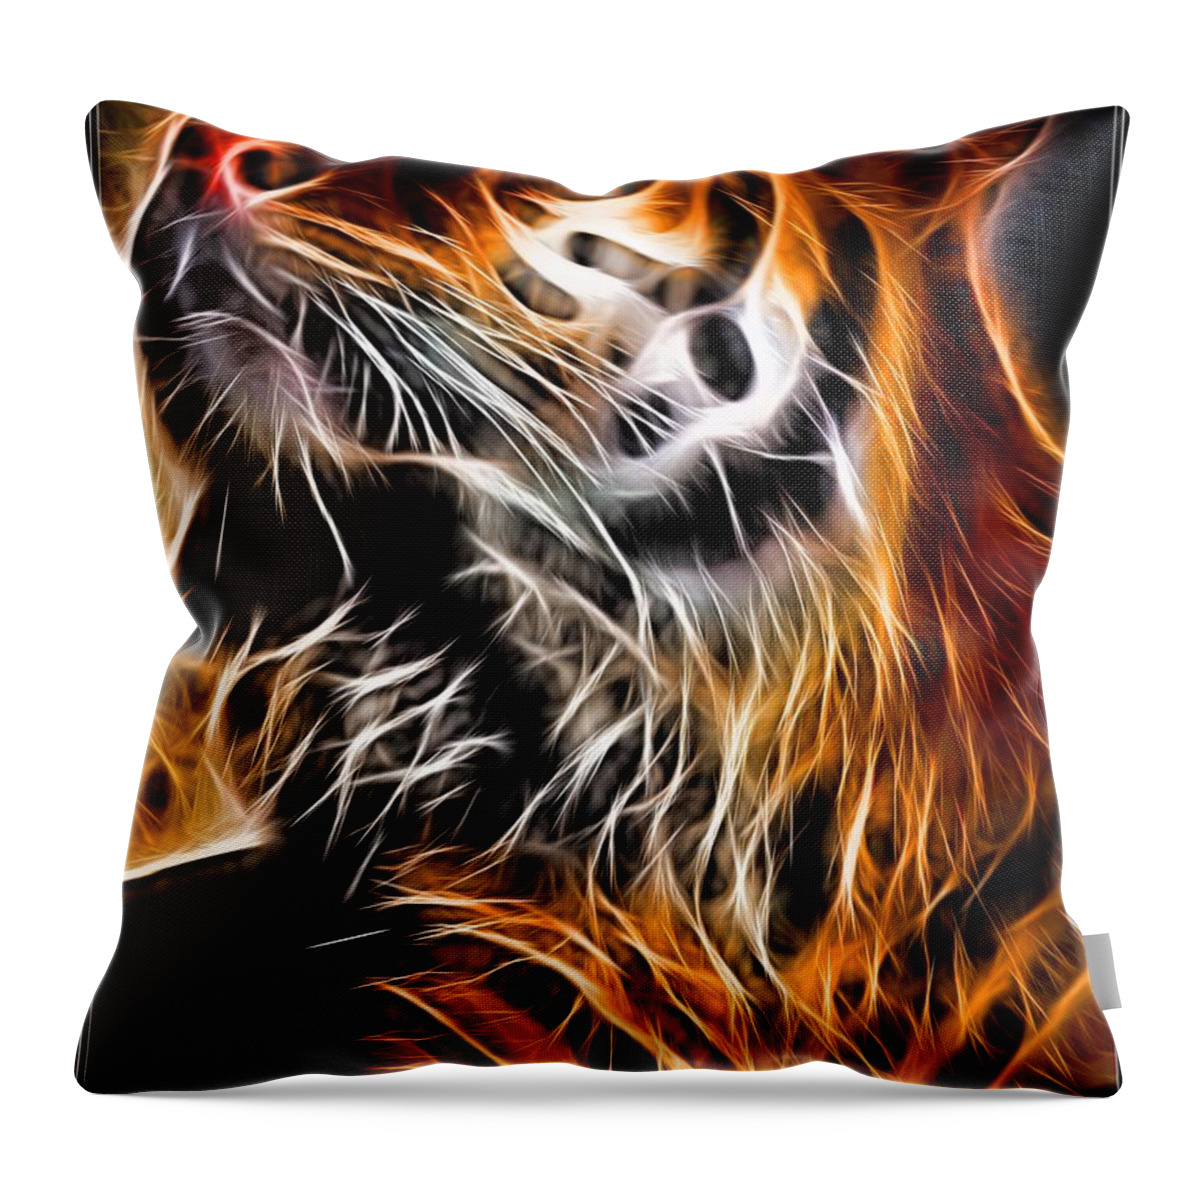 Tiger Throw Pillow featuring the painting Glowing Tiger by Jon Volden